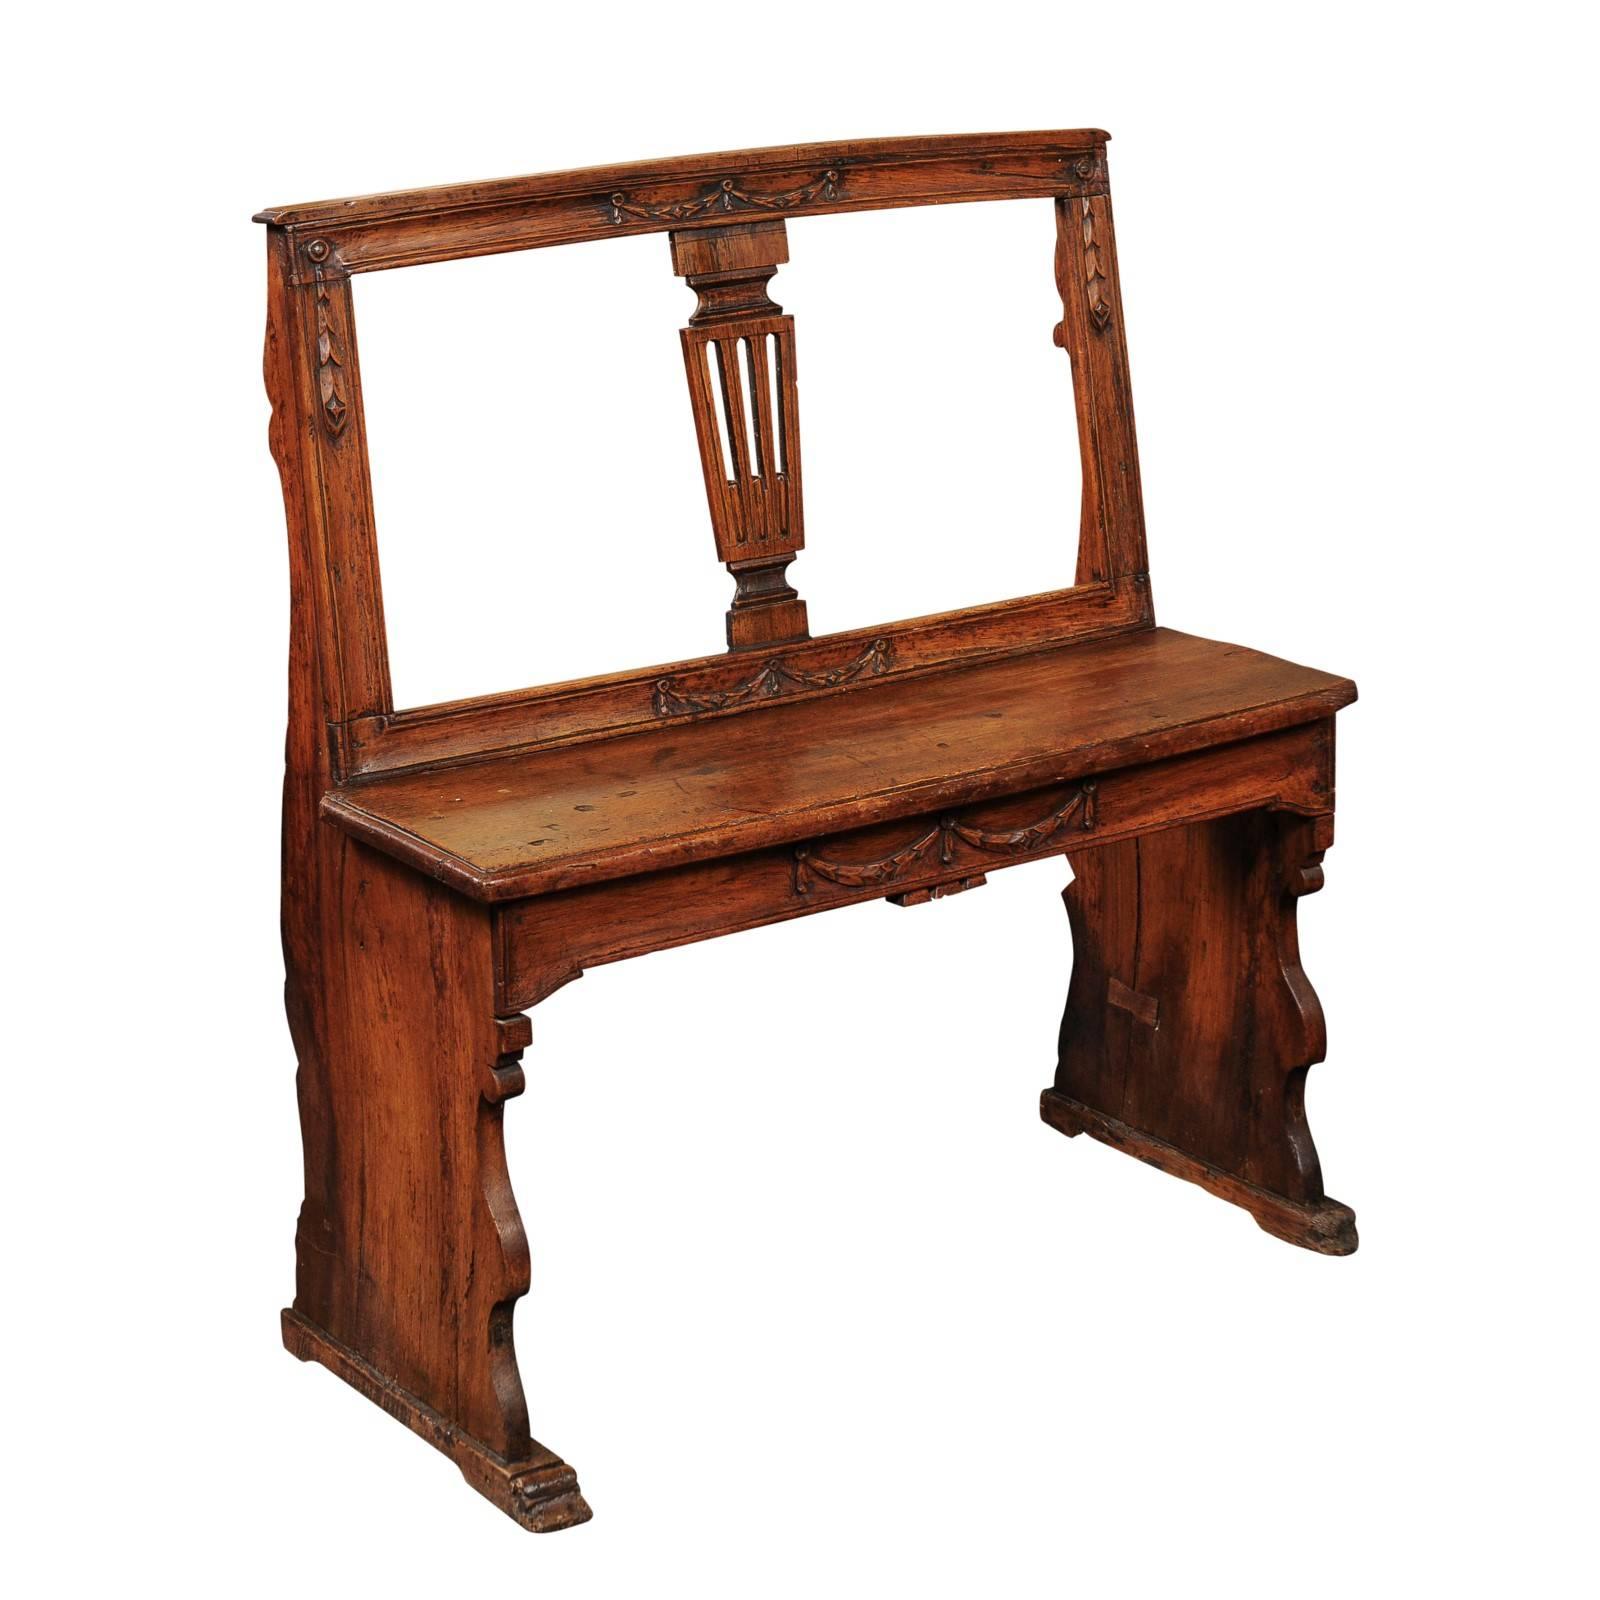 English Early 19th Century Walnut Bench with Pierced Back and Swag Motifs